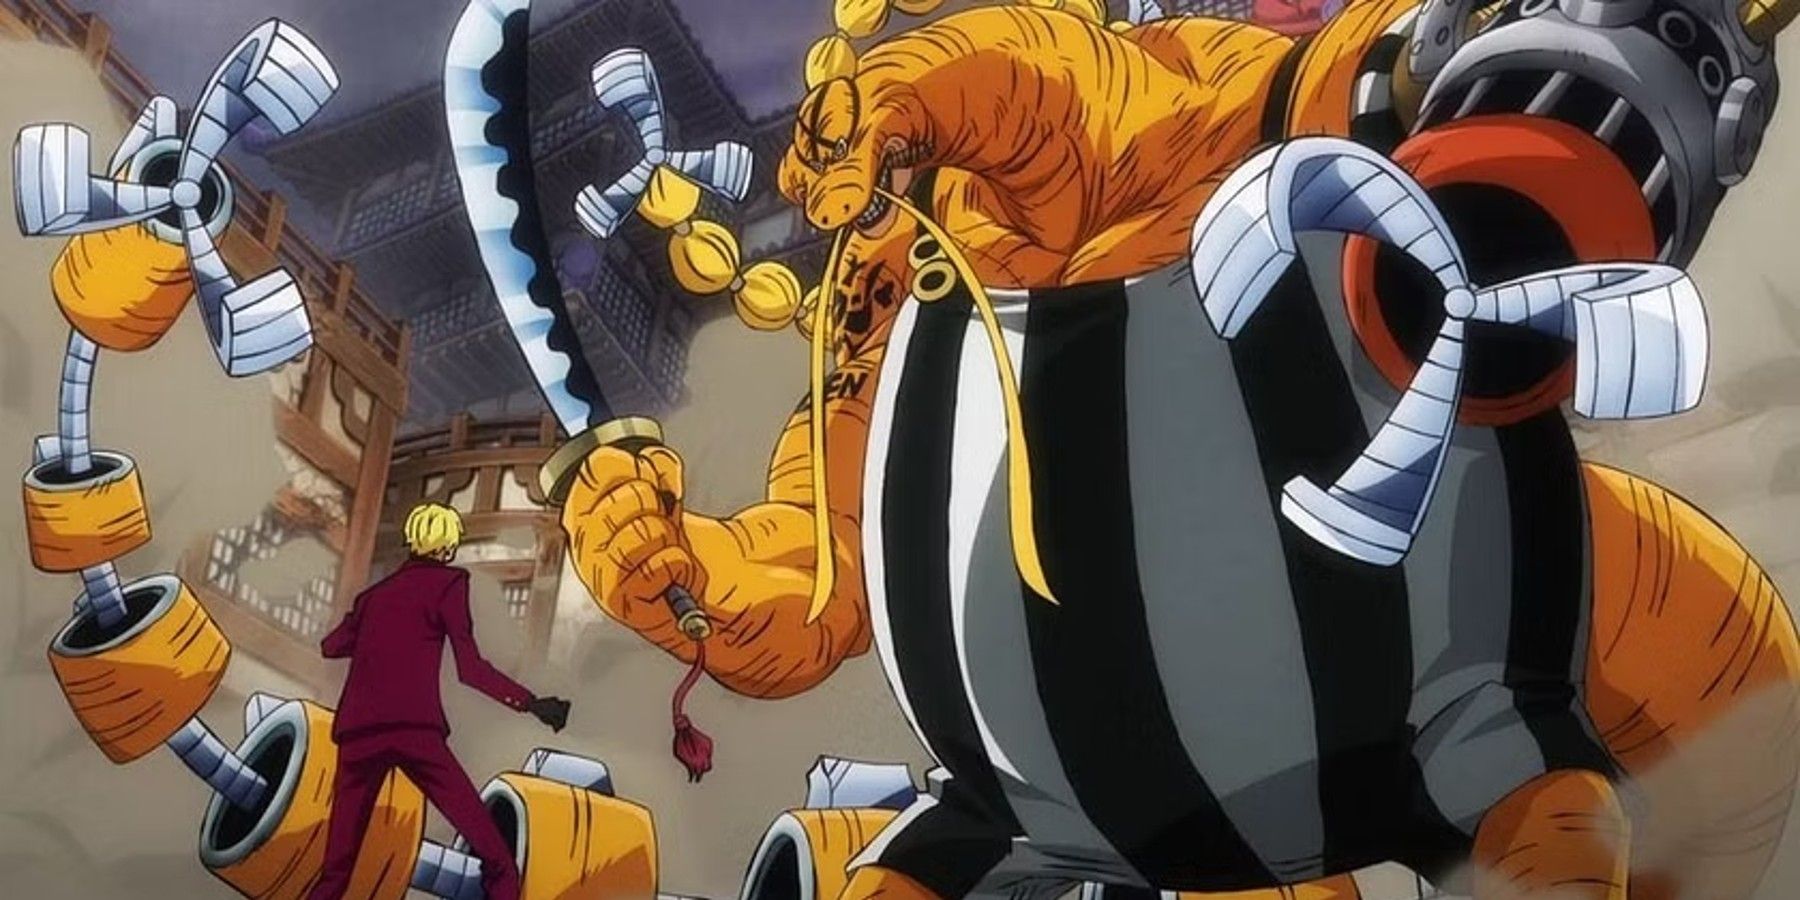 Queen In His Hybrid Cyborg Form Fighting Sanji in One Piece